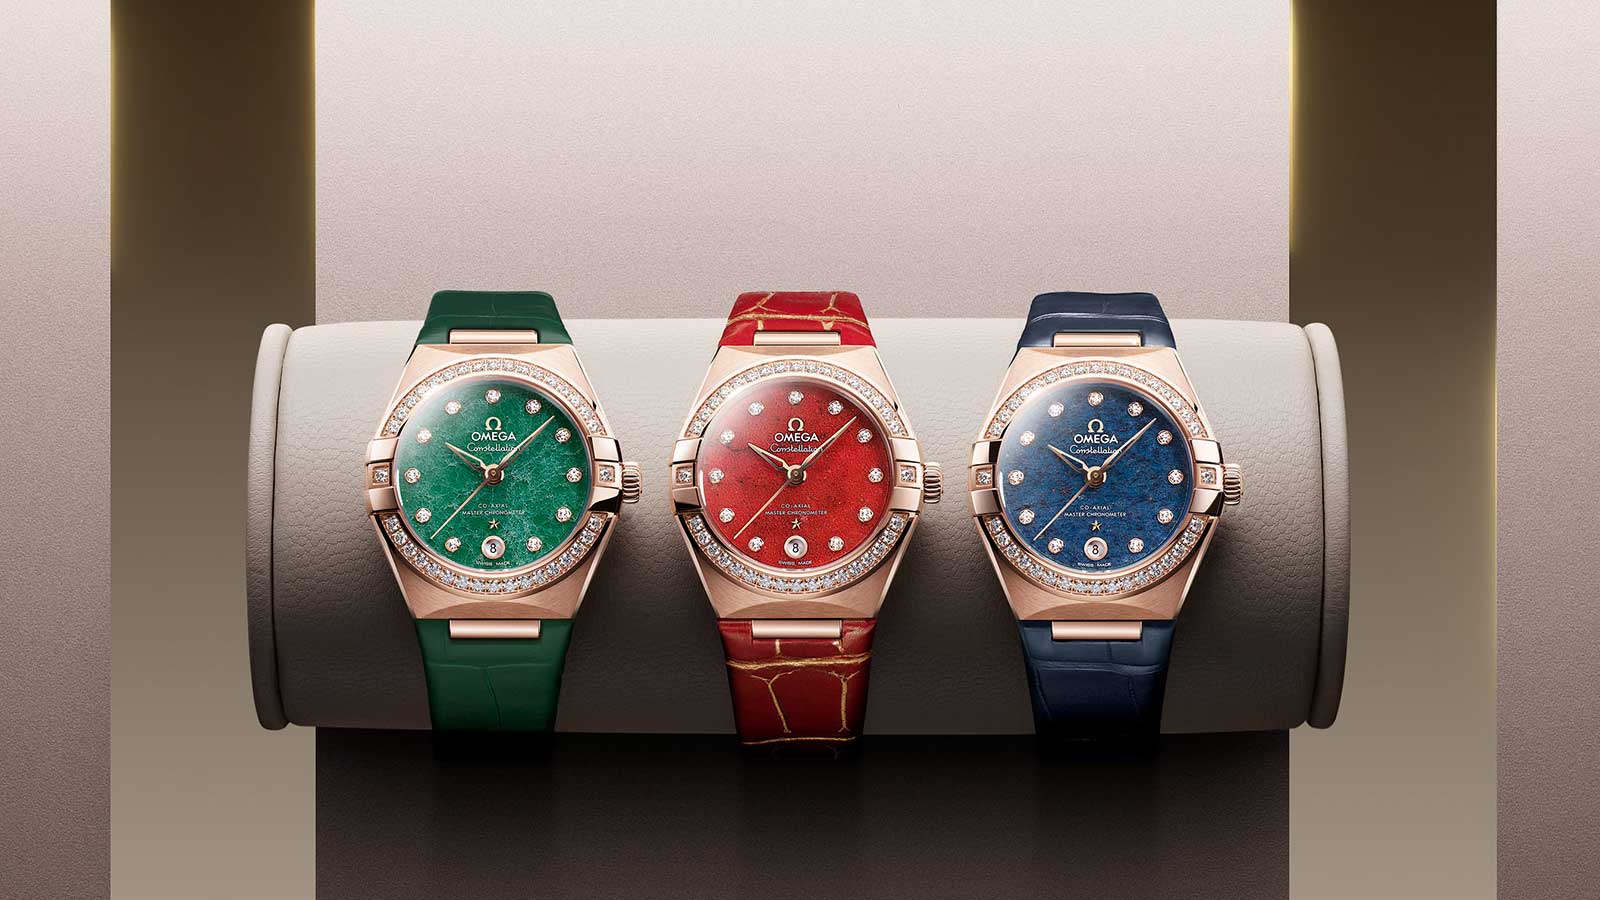 Omega Constellation watches